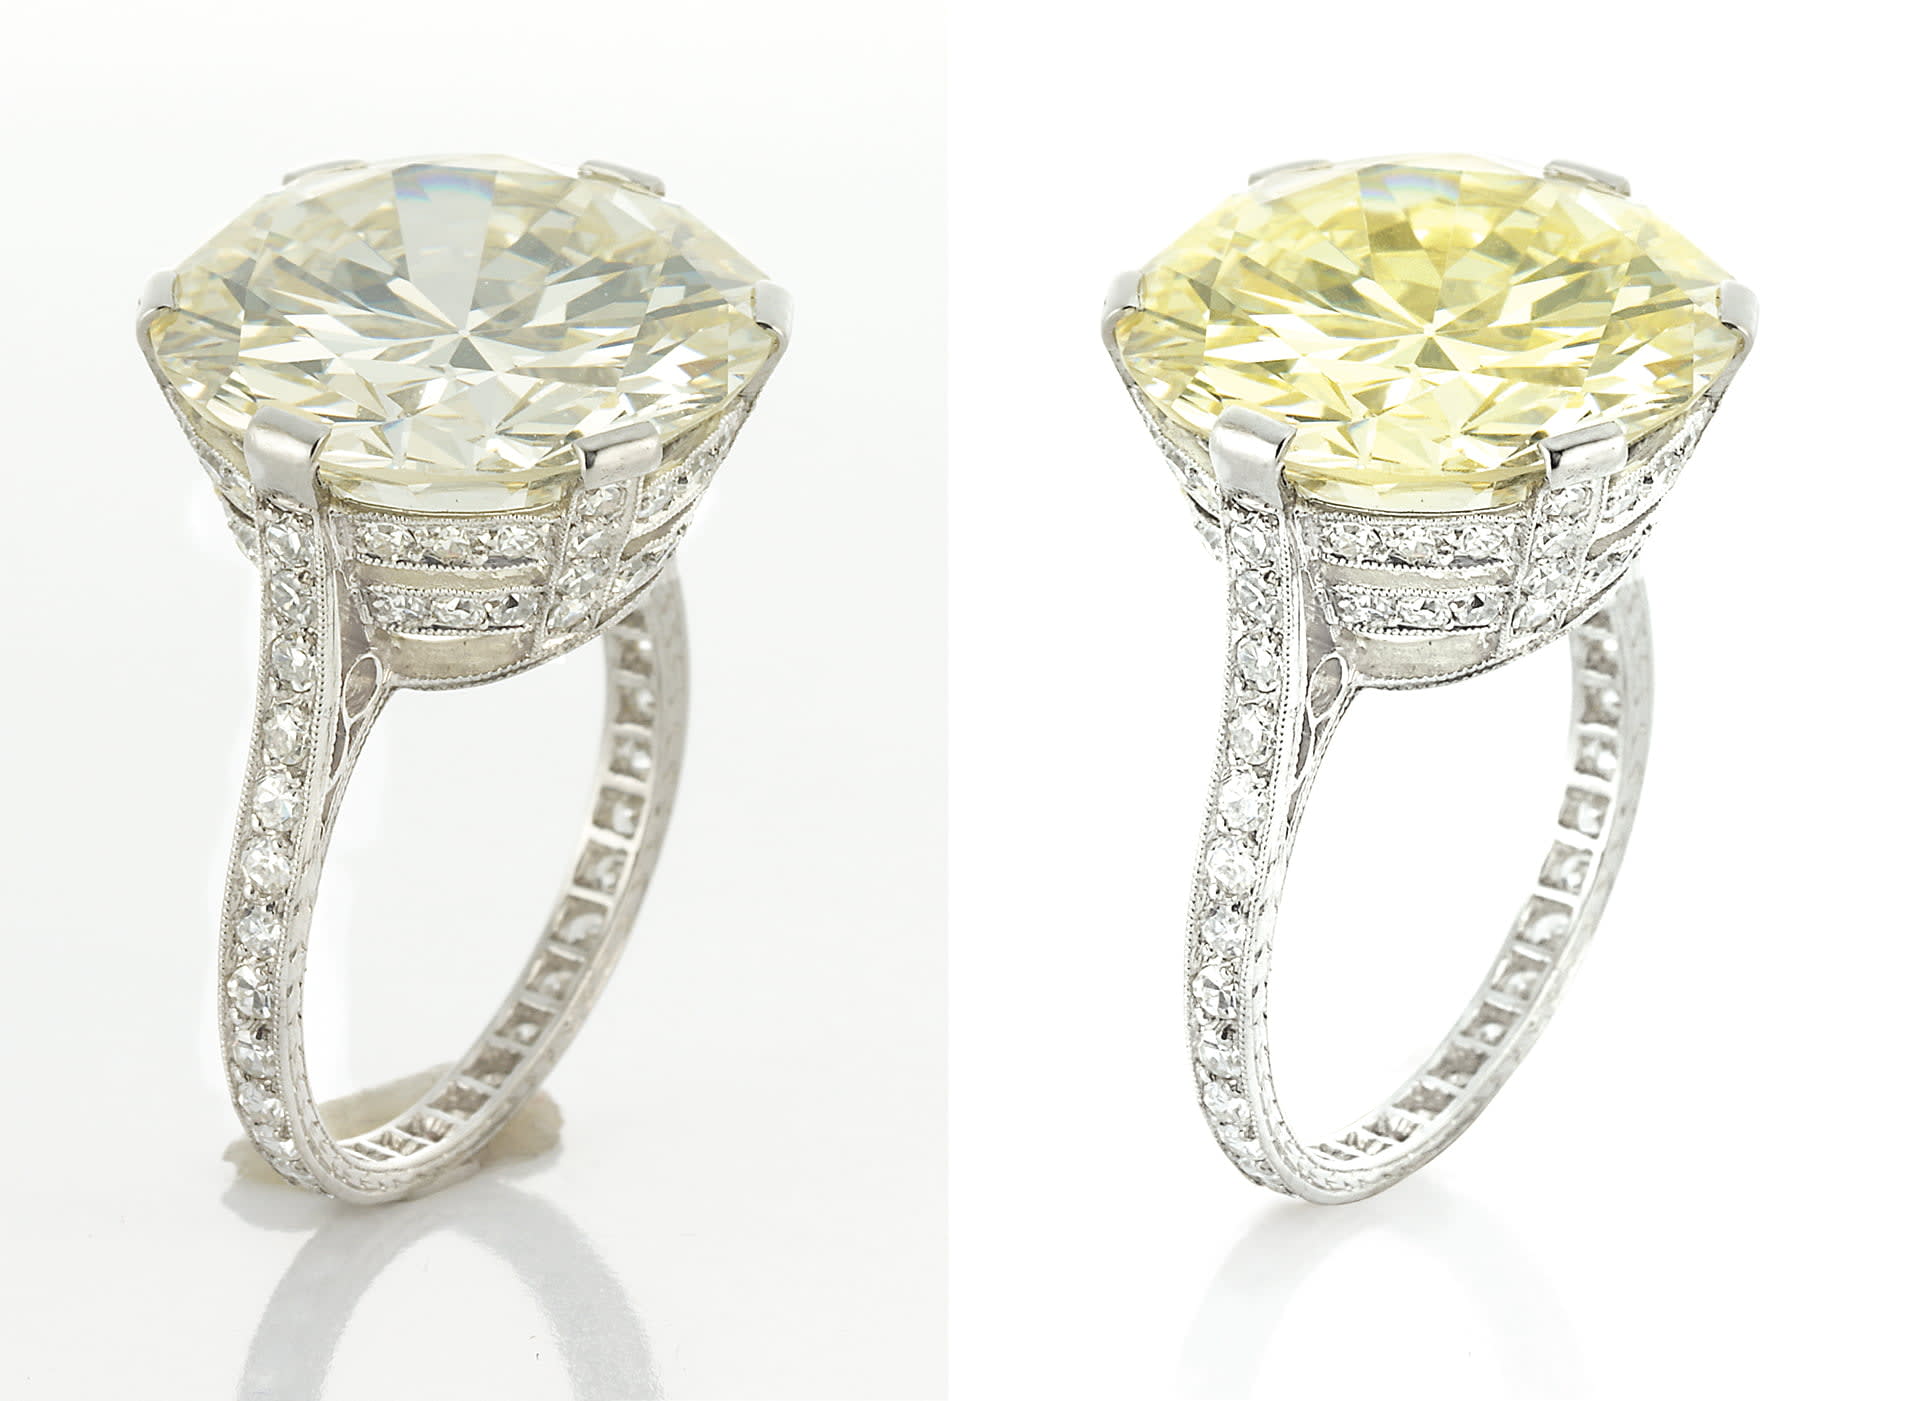 Jewelry Retouching Services Before and After Image 3